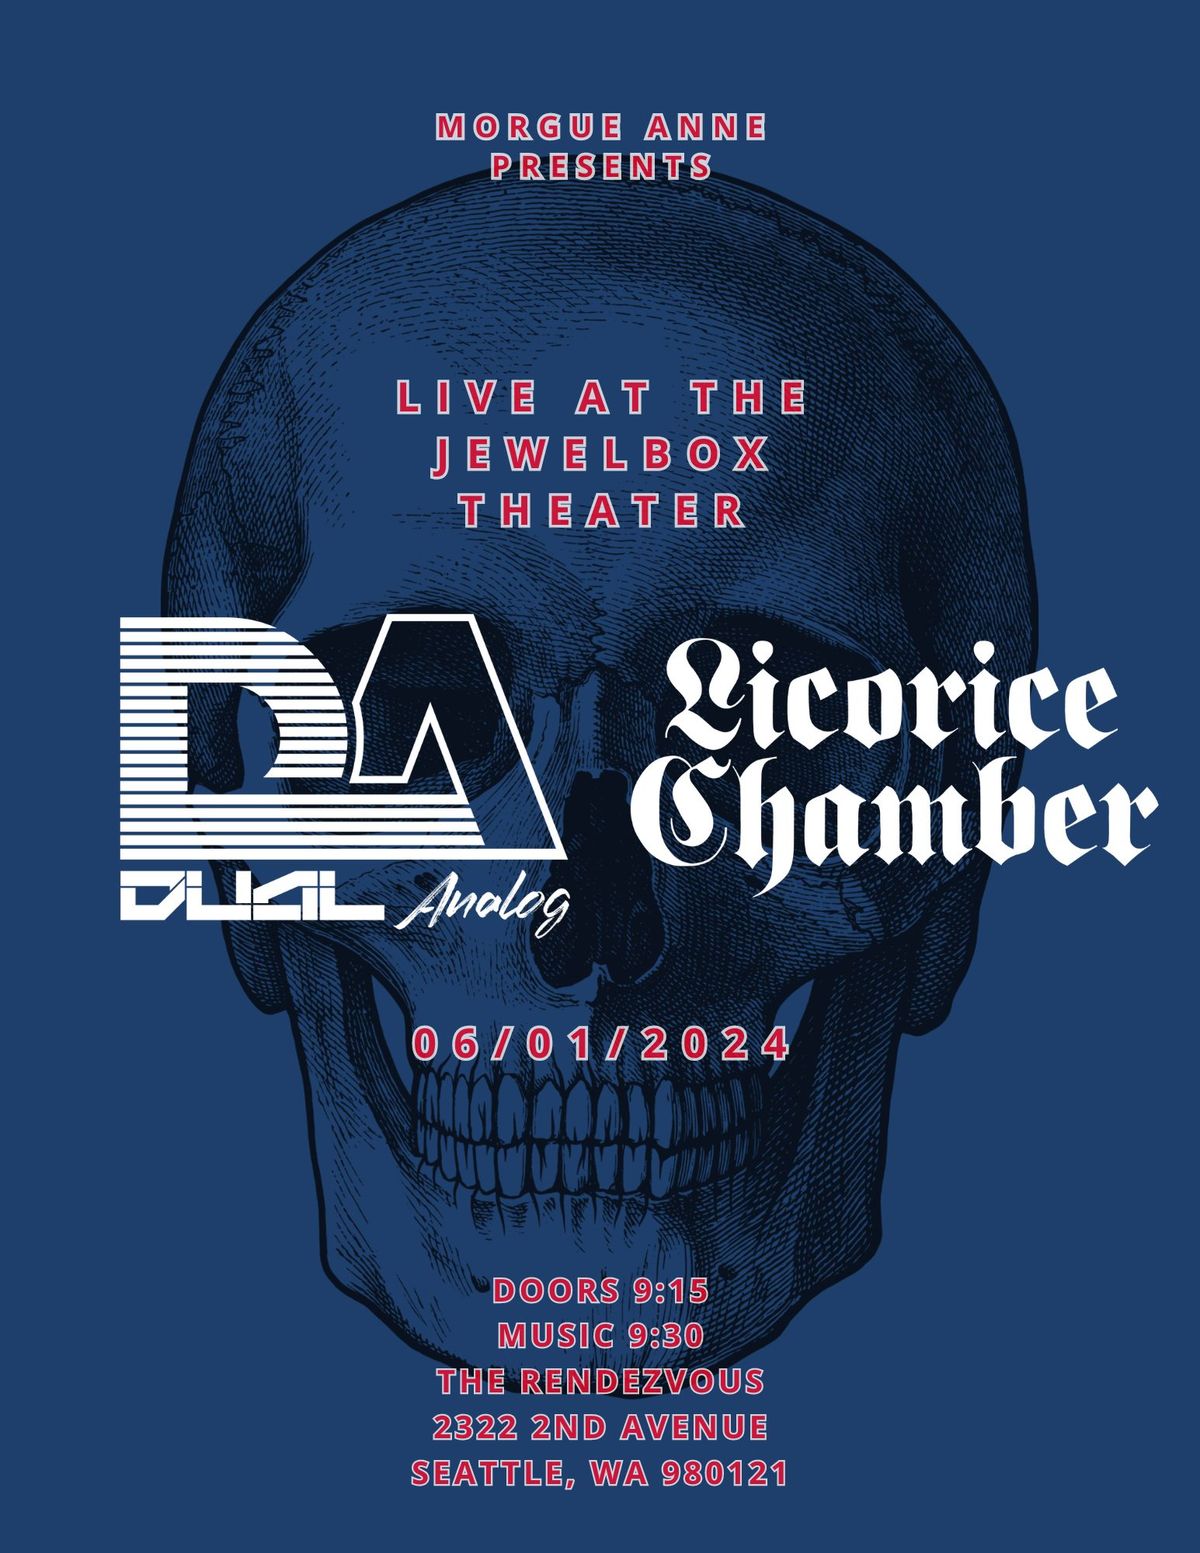 Morgue Anne Presents: Dual Analog \/ Licorice Chamber Live at the Rendezvous